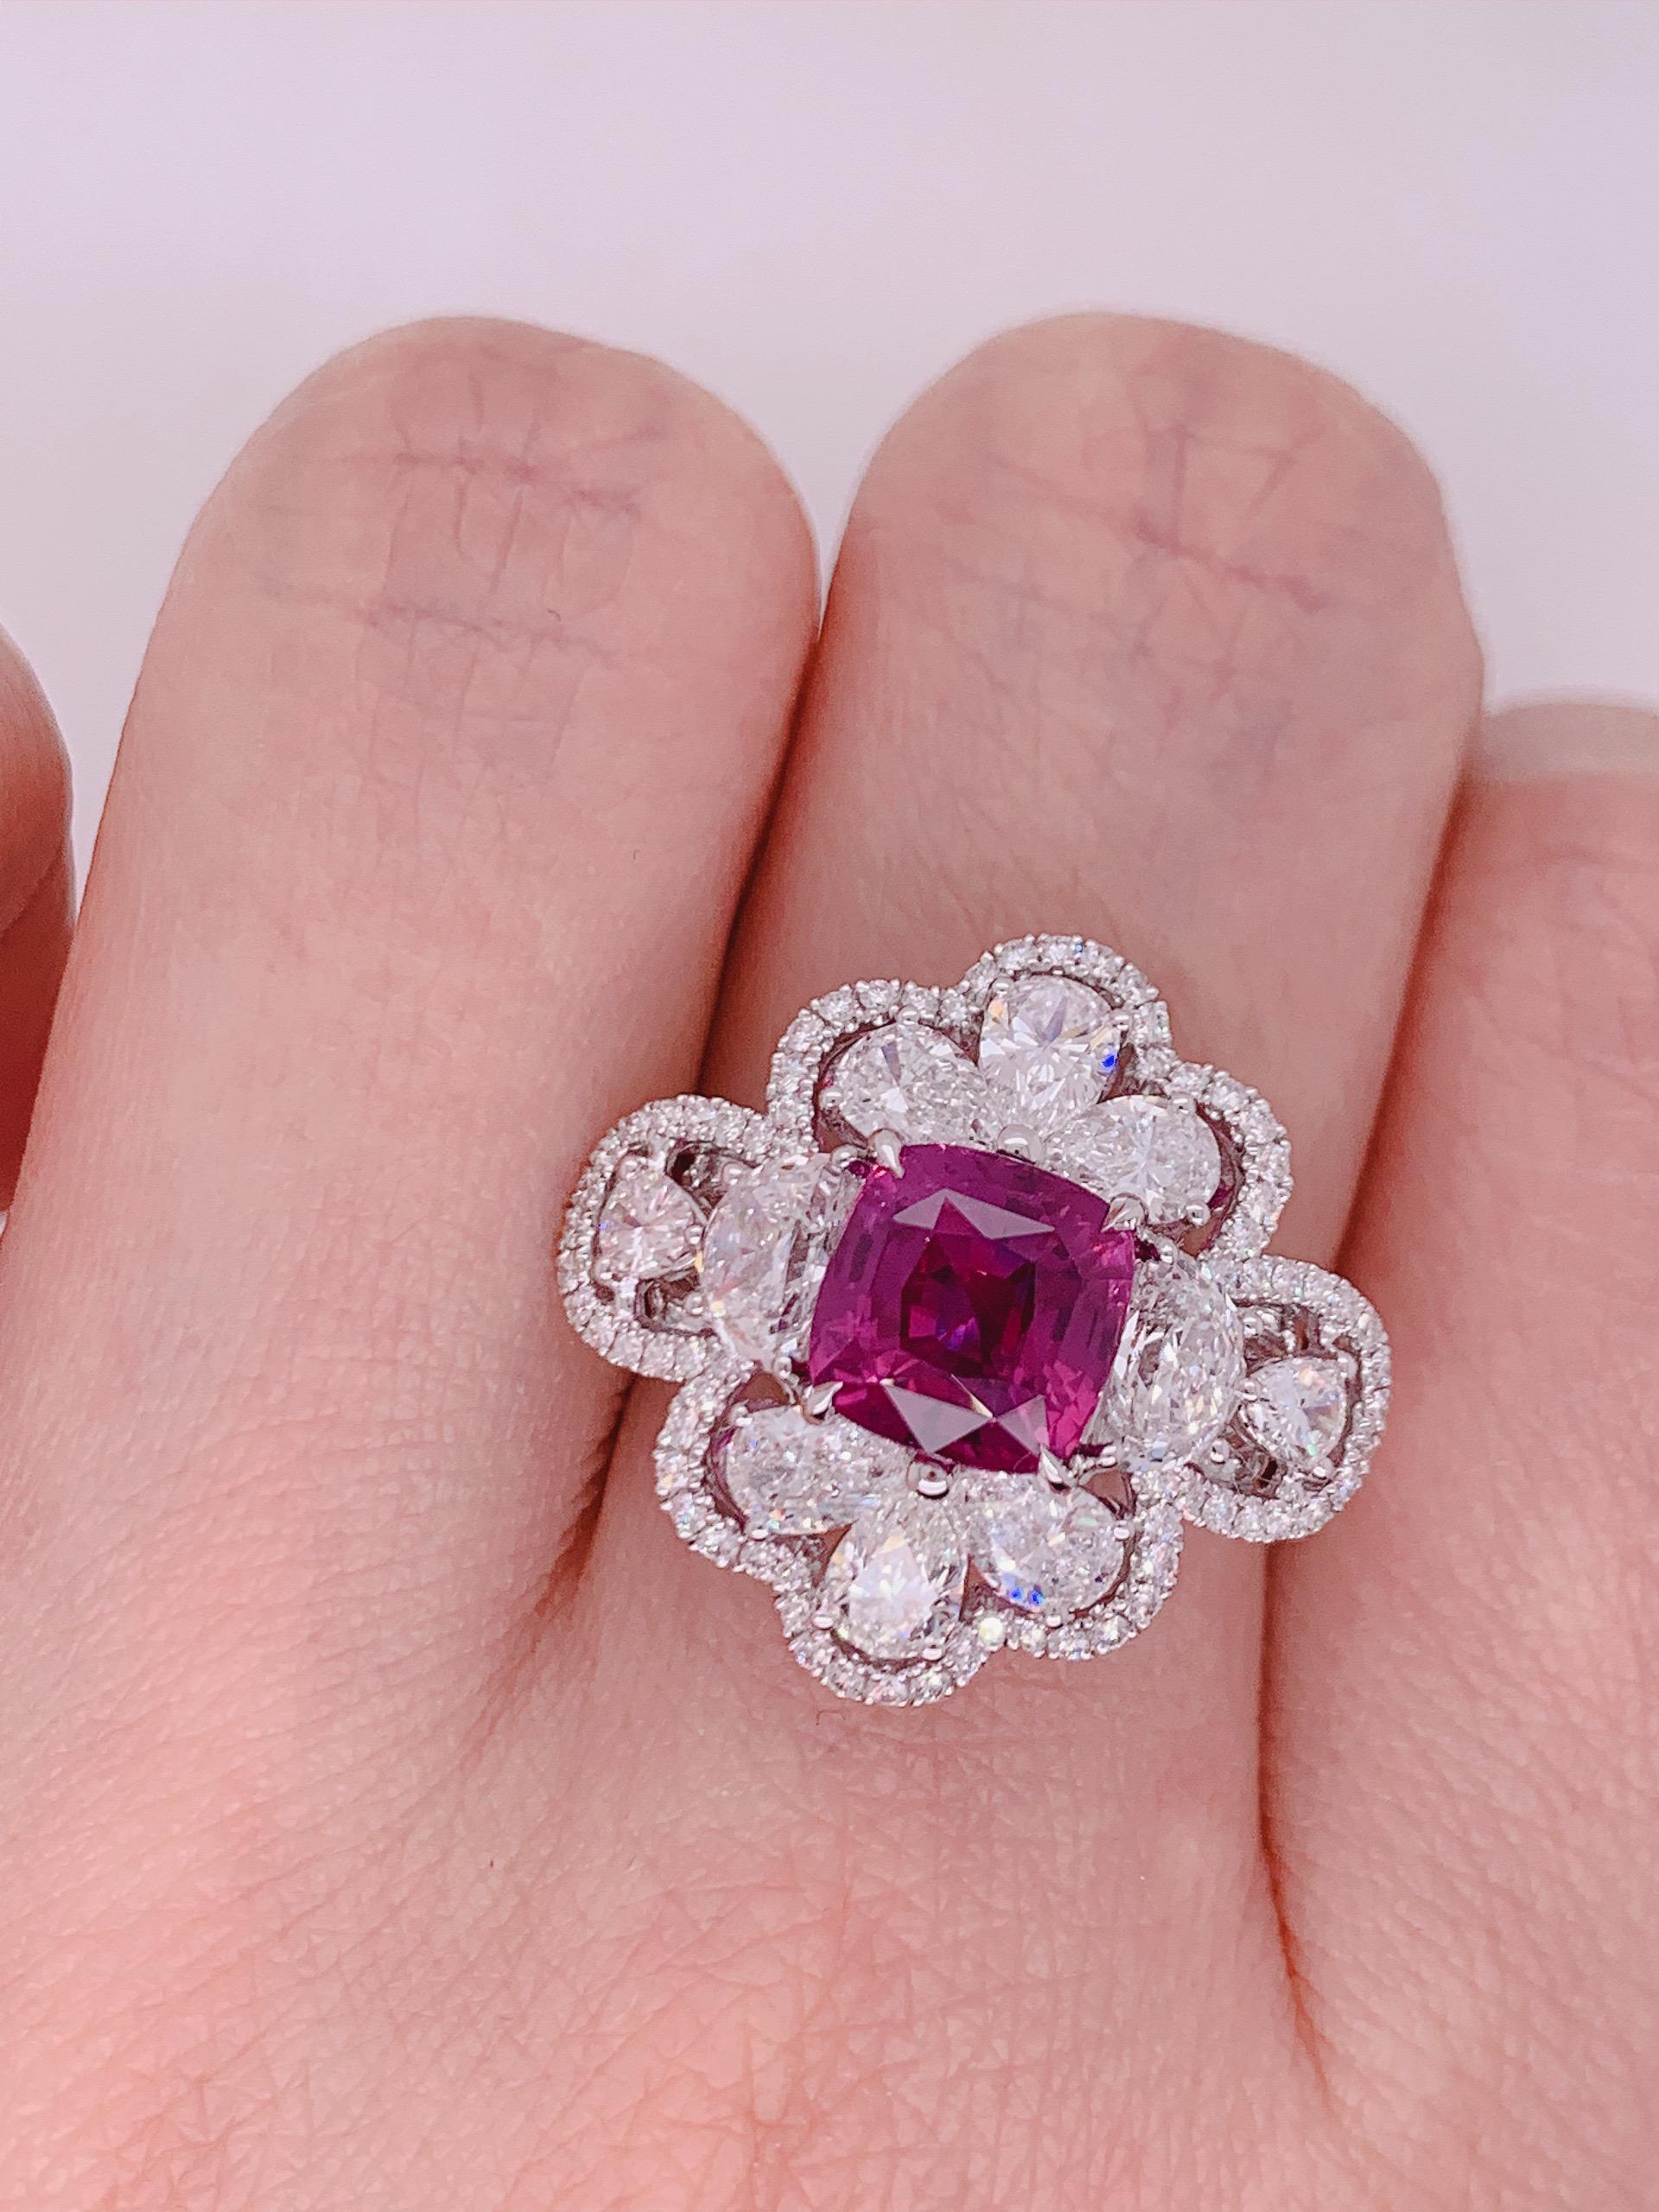 KAHN GRS Certified 3.11 Carat Unheated Pink Sapphire Ring In New Condition For Sale In Tsim Sha Tsui, HK